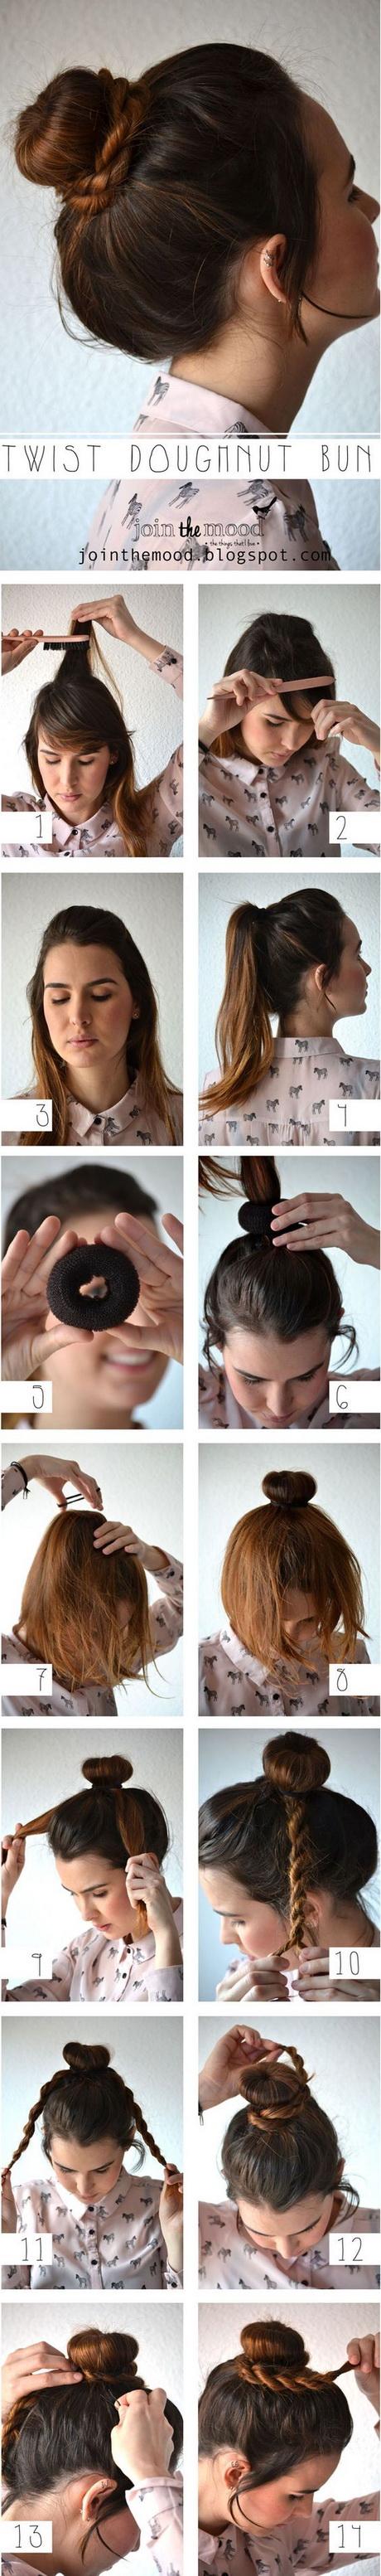 5 hairstyles to try tonight 5-hairstyles-to-try-tonight-92_3